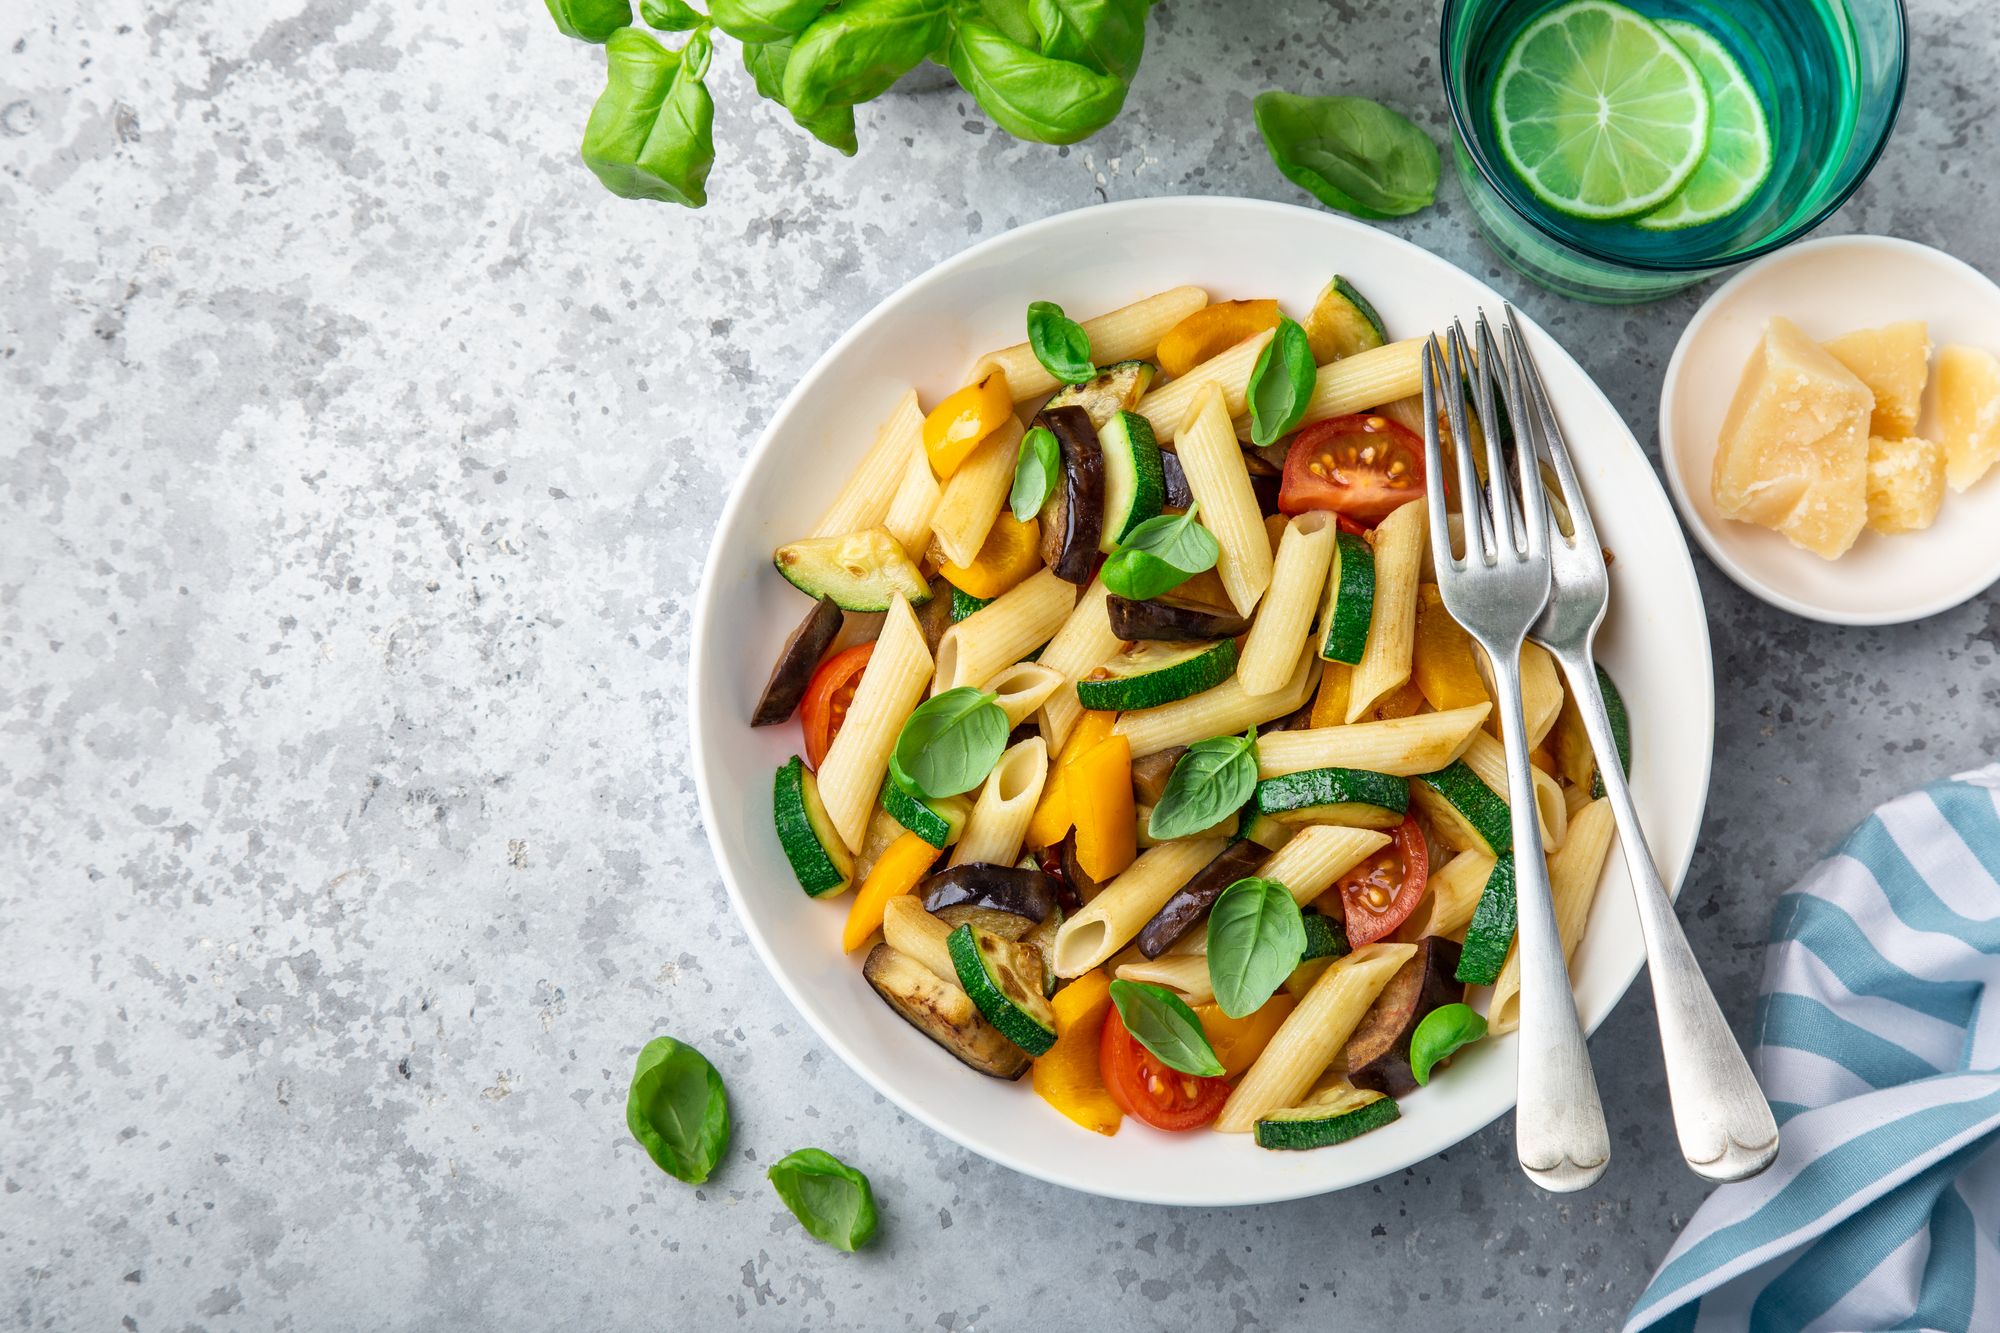 Courgette Pasta with Ricotta and Herbs